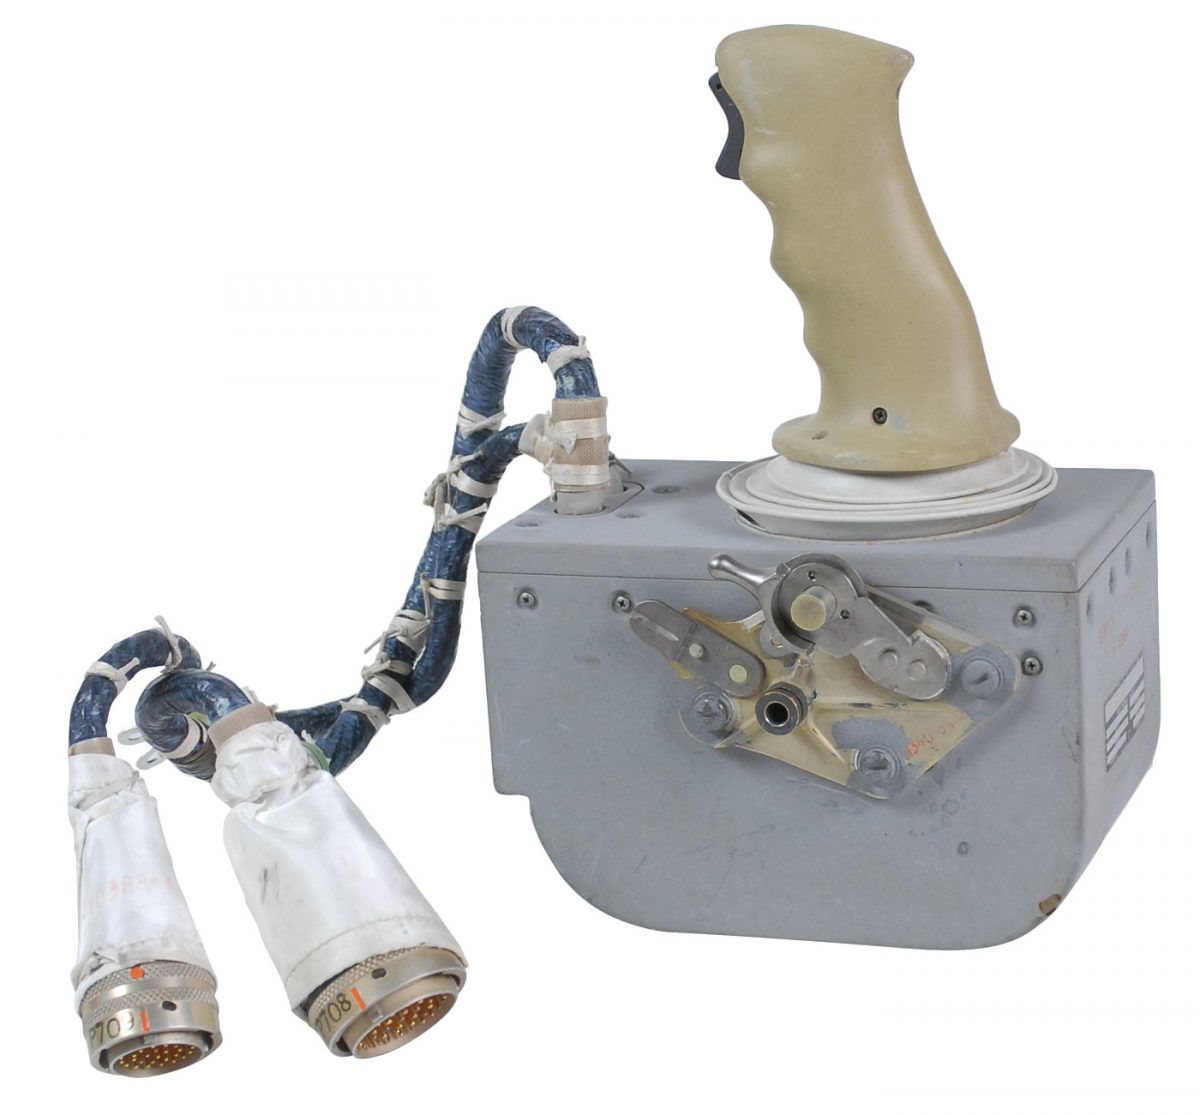 Astronaut Sells Apollo 15 Hand Controller for $610,000+ at Auction